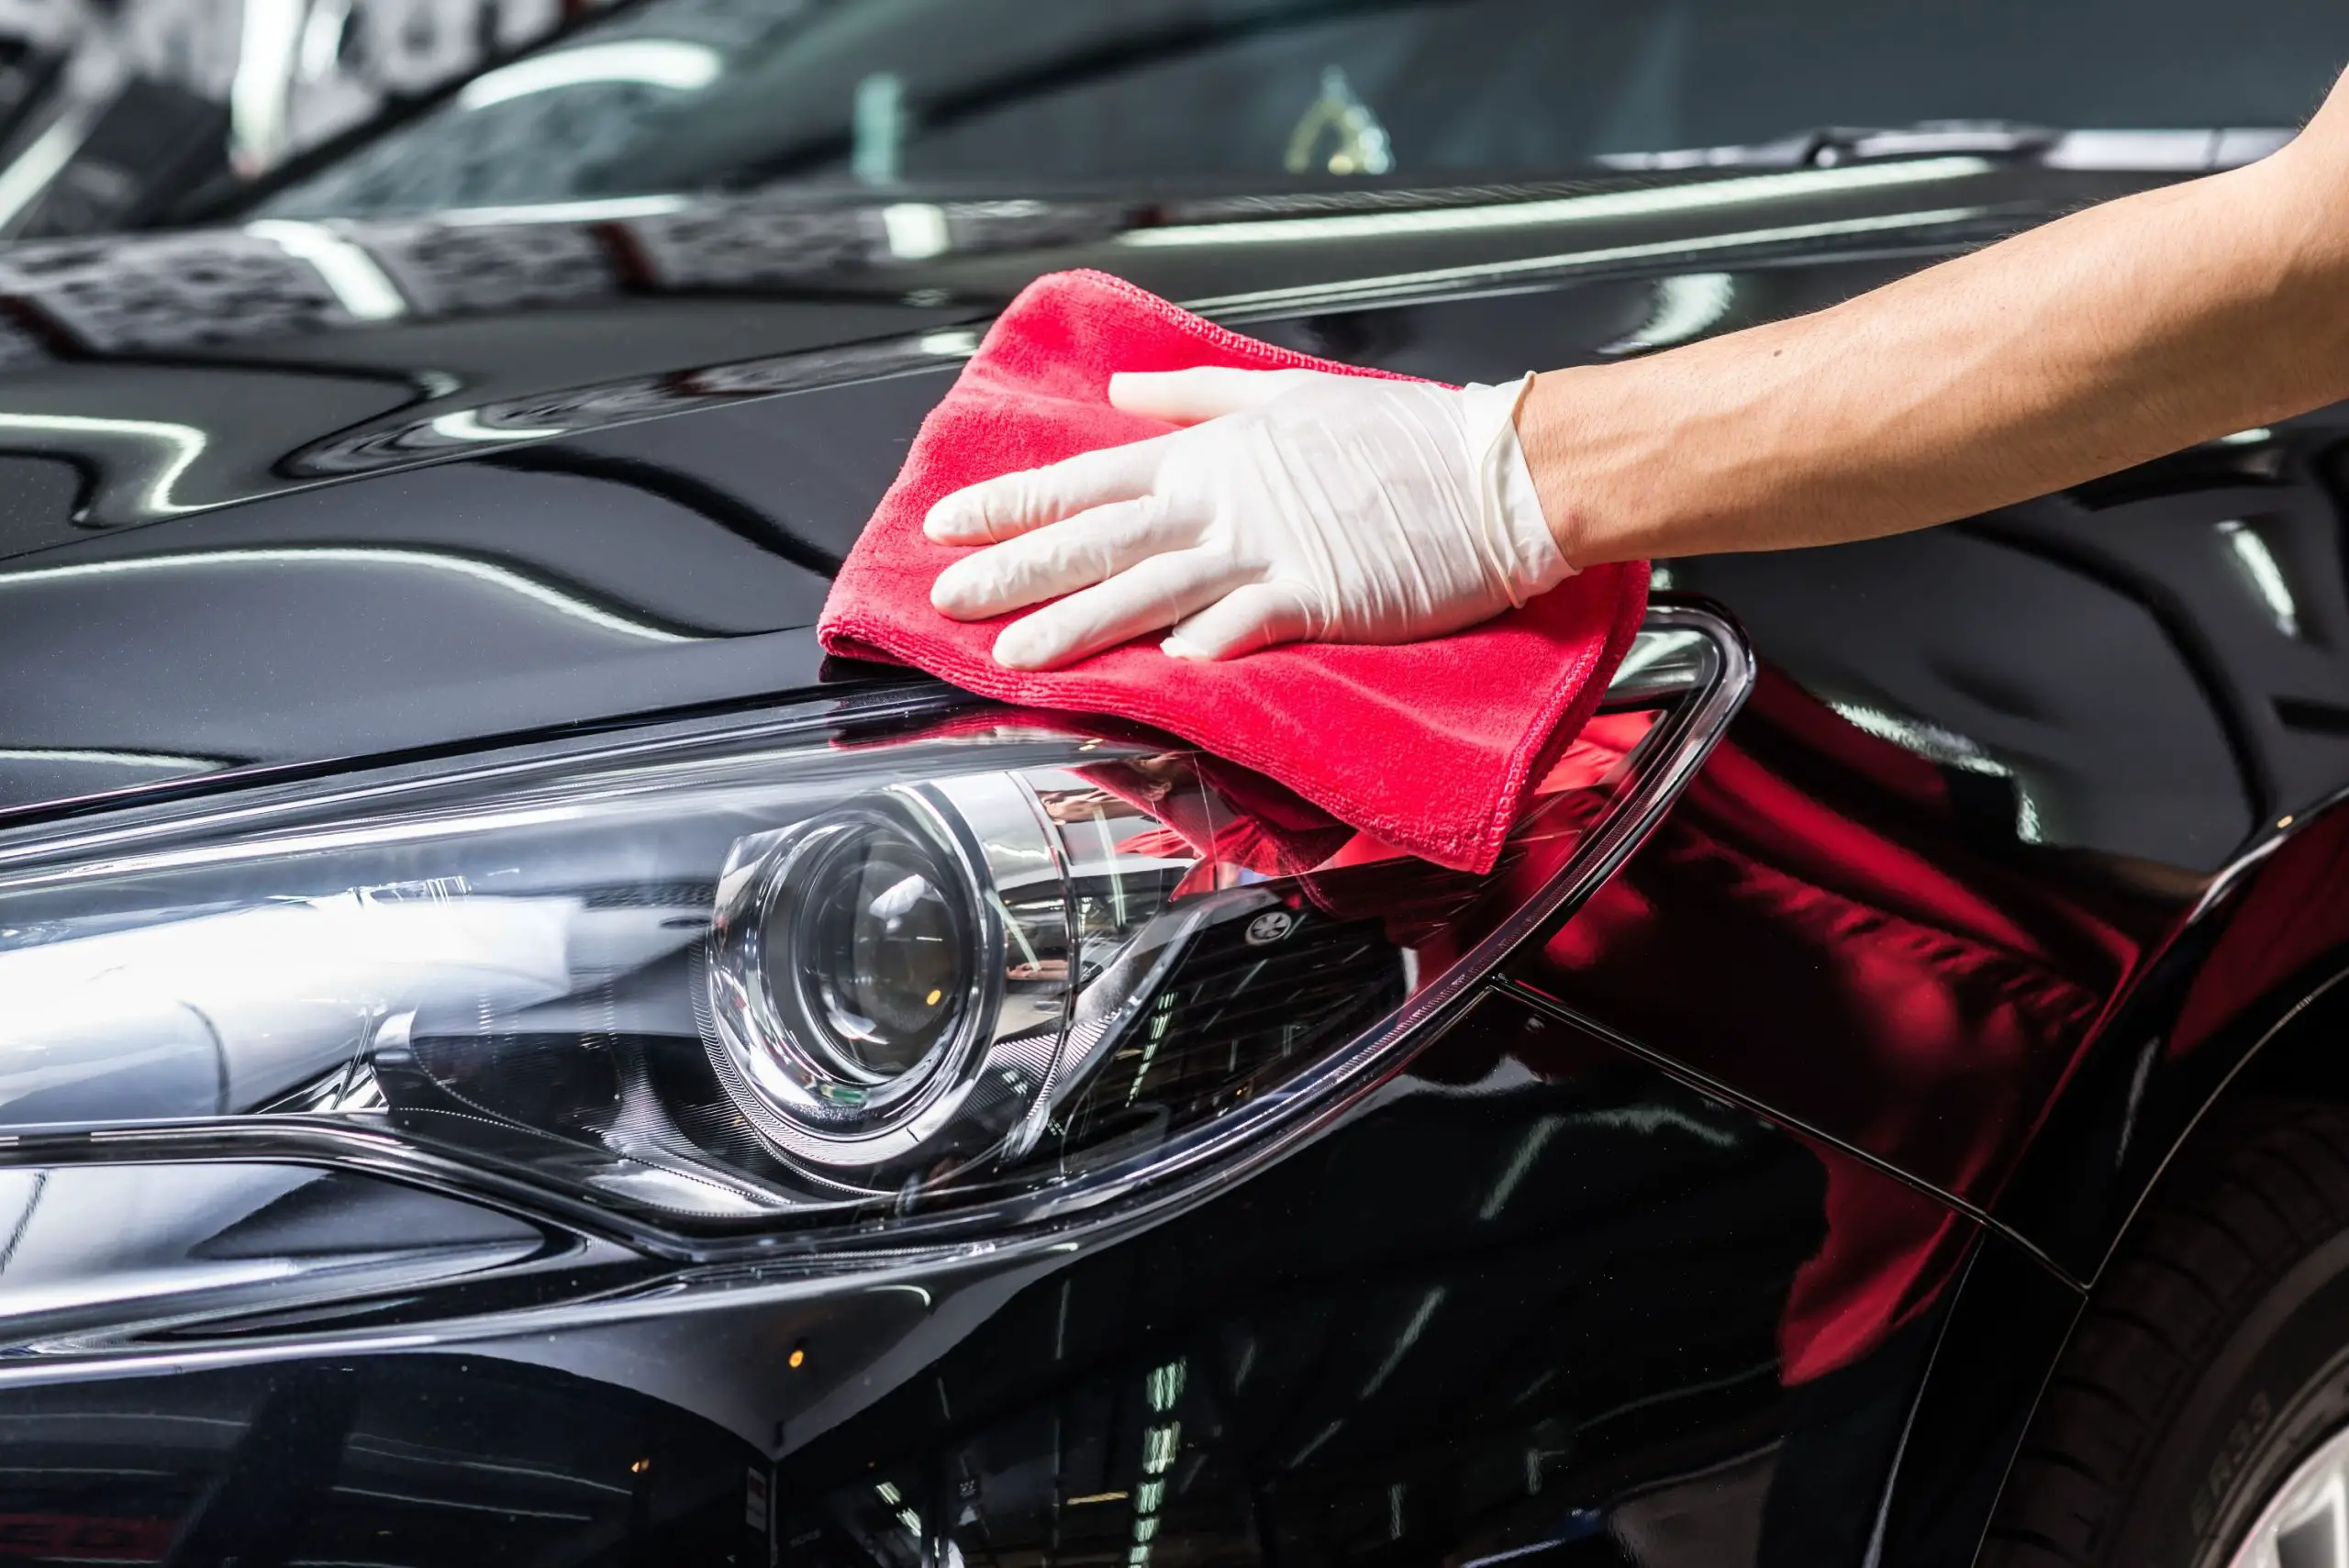 15 Cleaning secrets only car detailers know